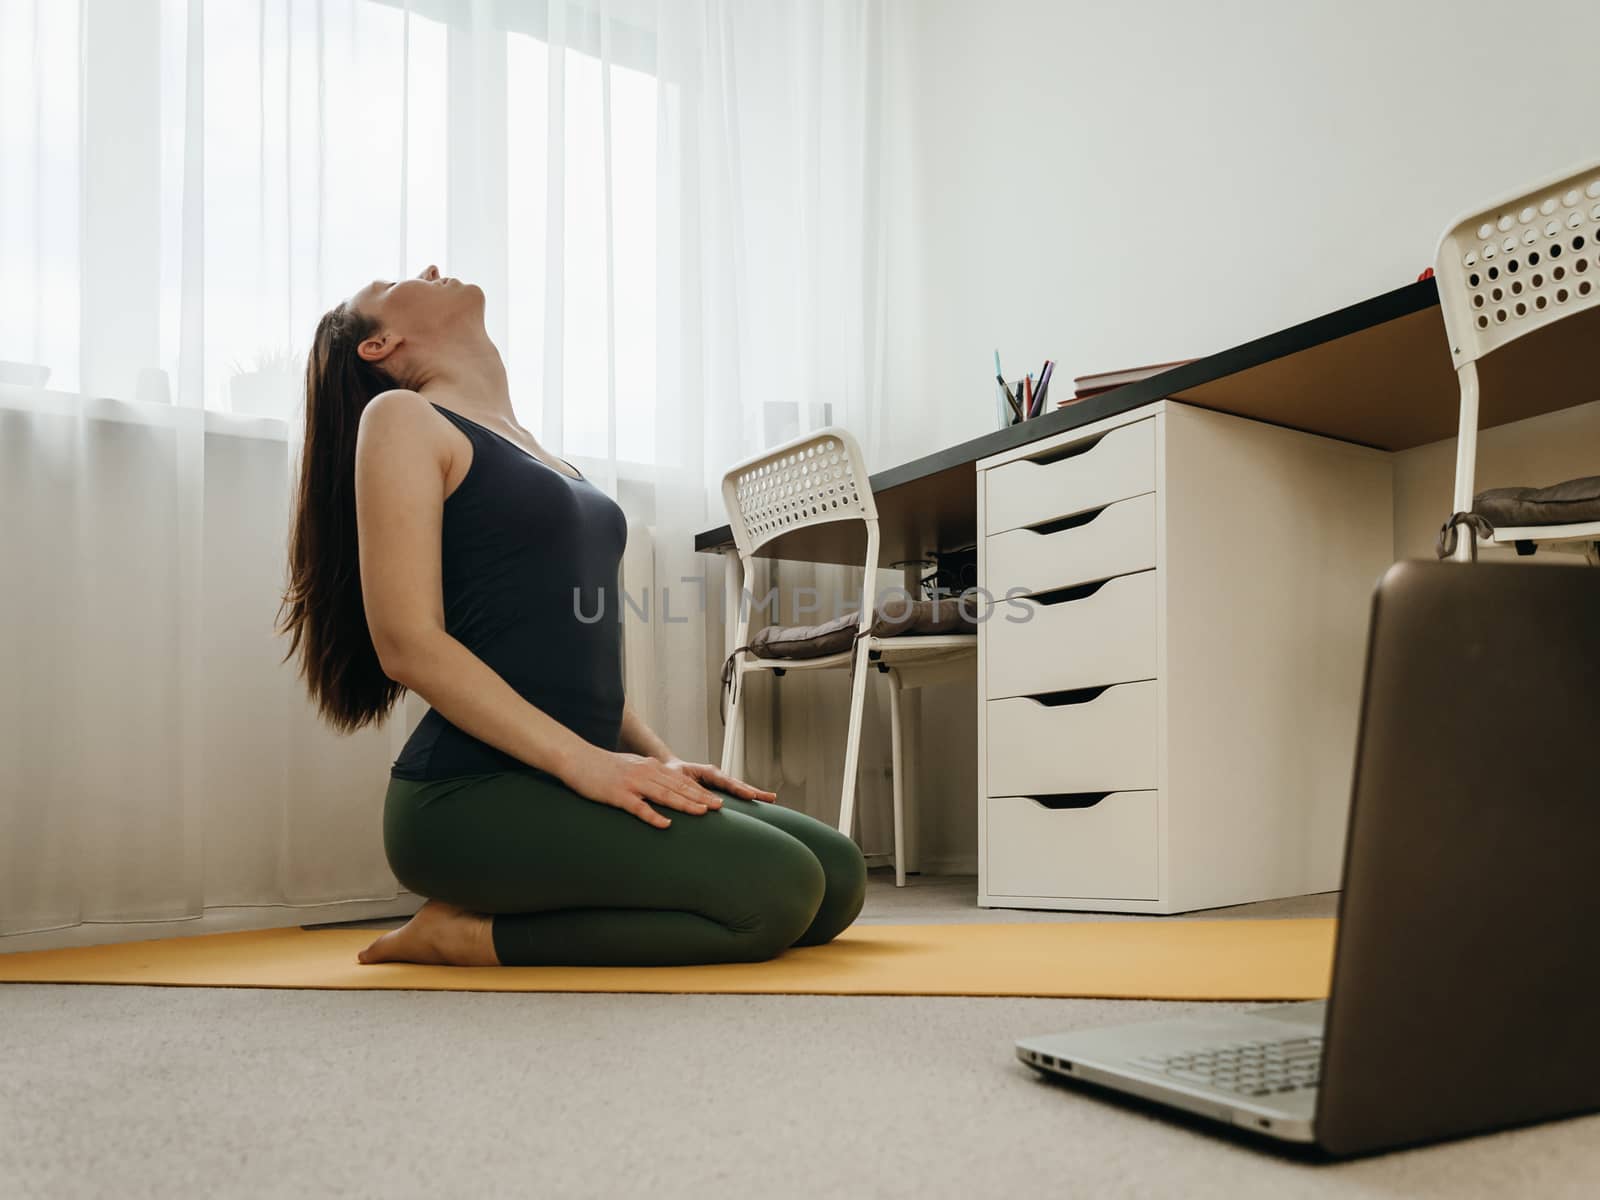 Yoga at home near laptop by fascinadora